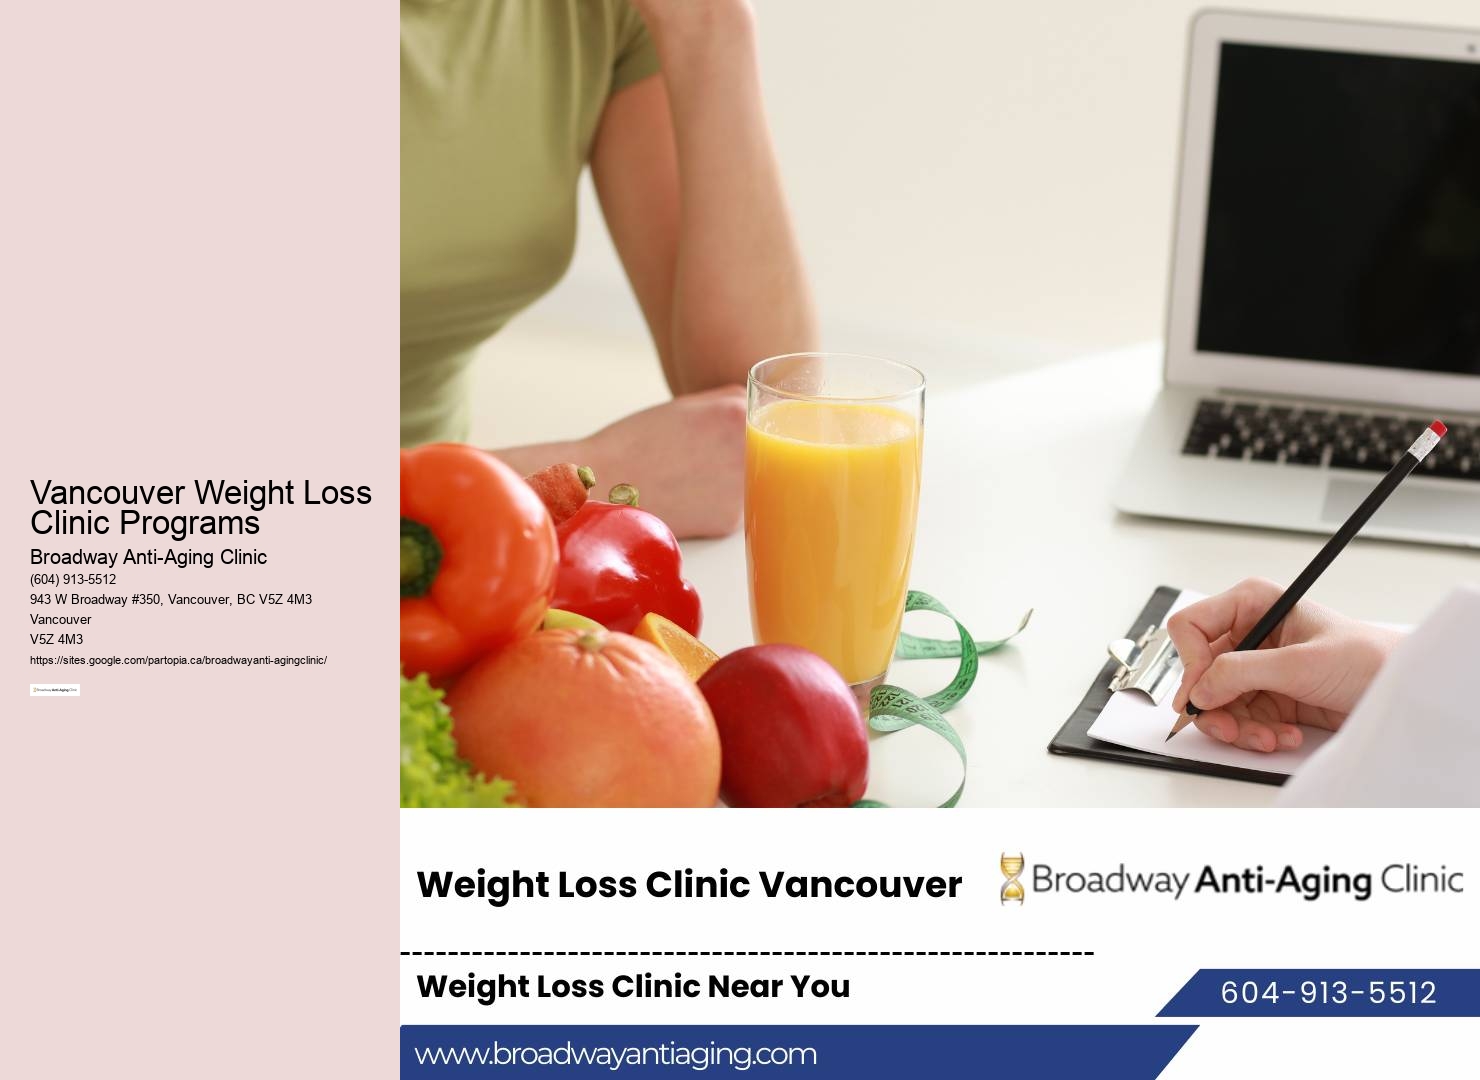 Medical weight loss Vancouver reviews